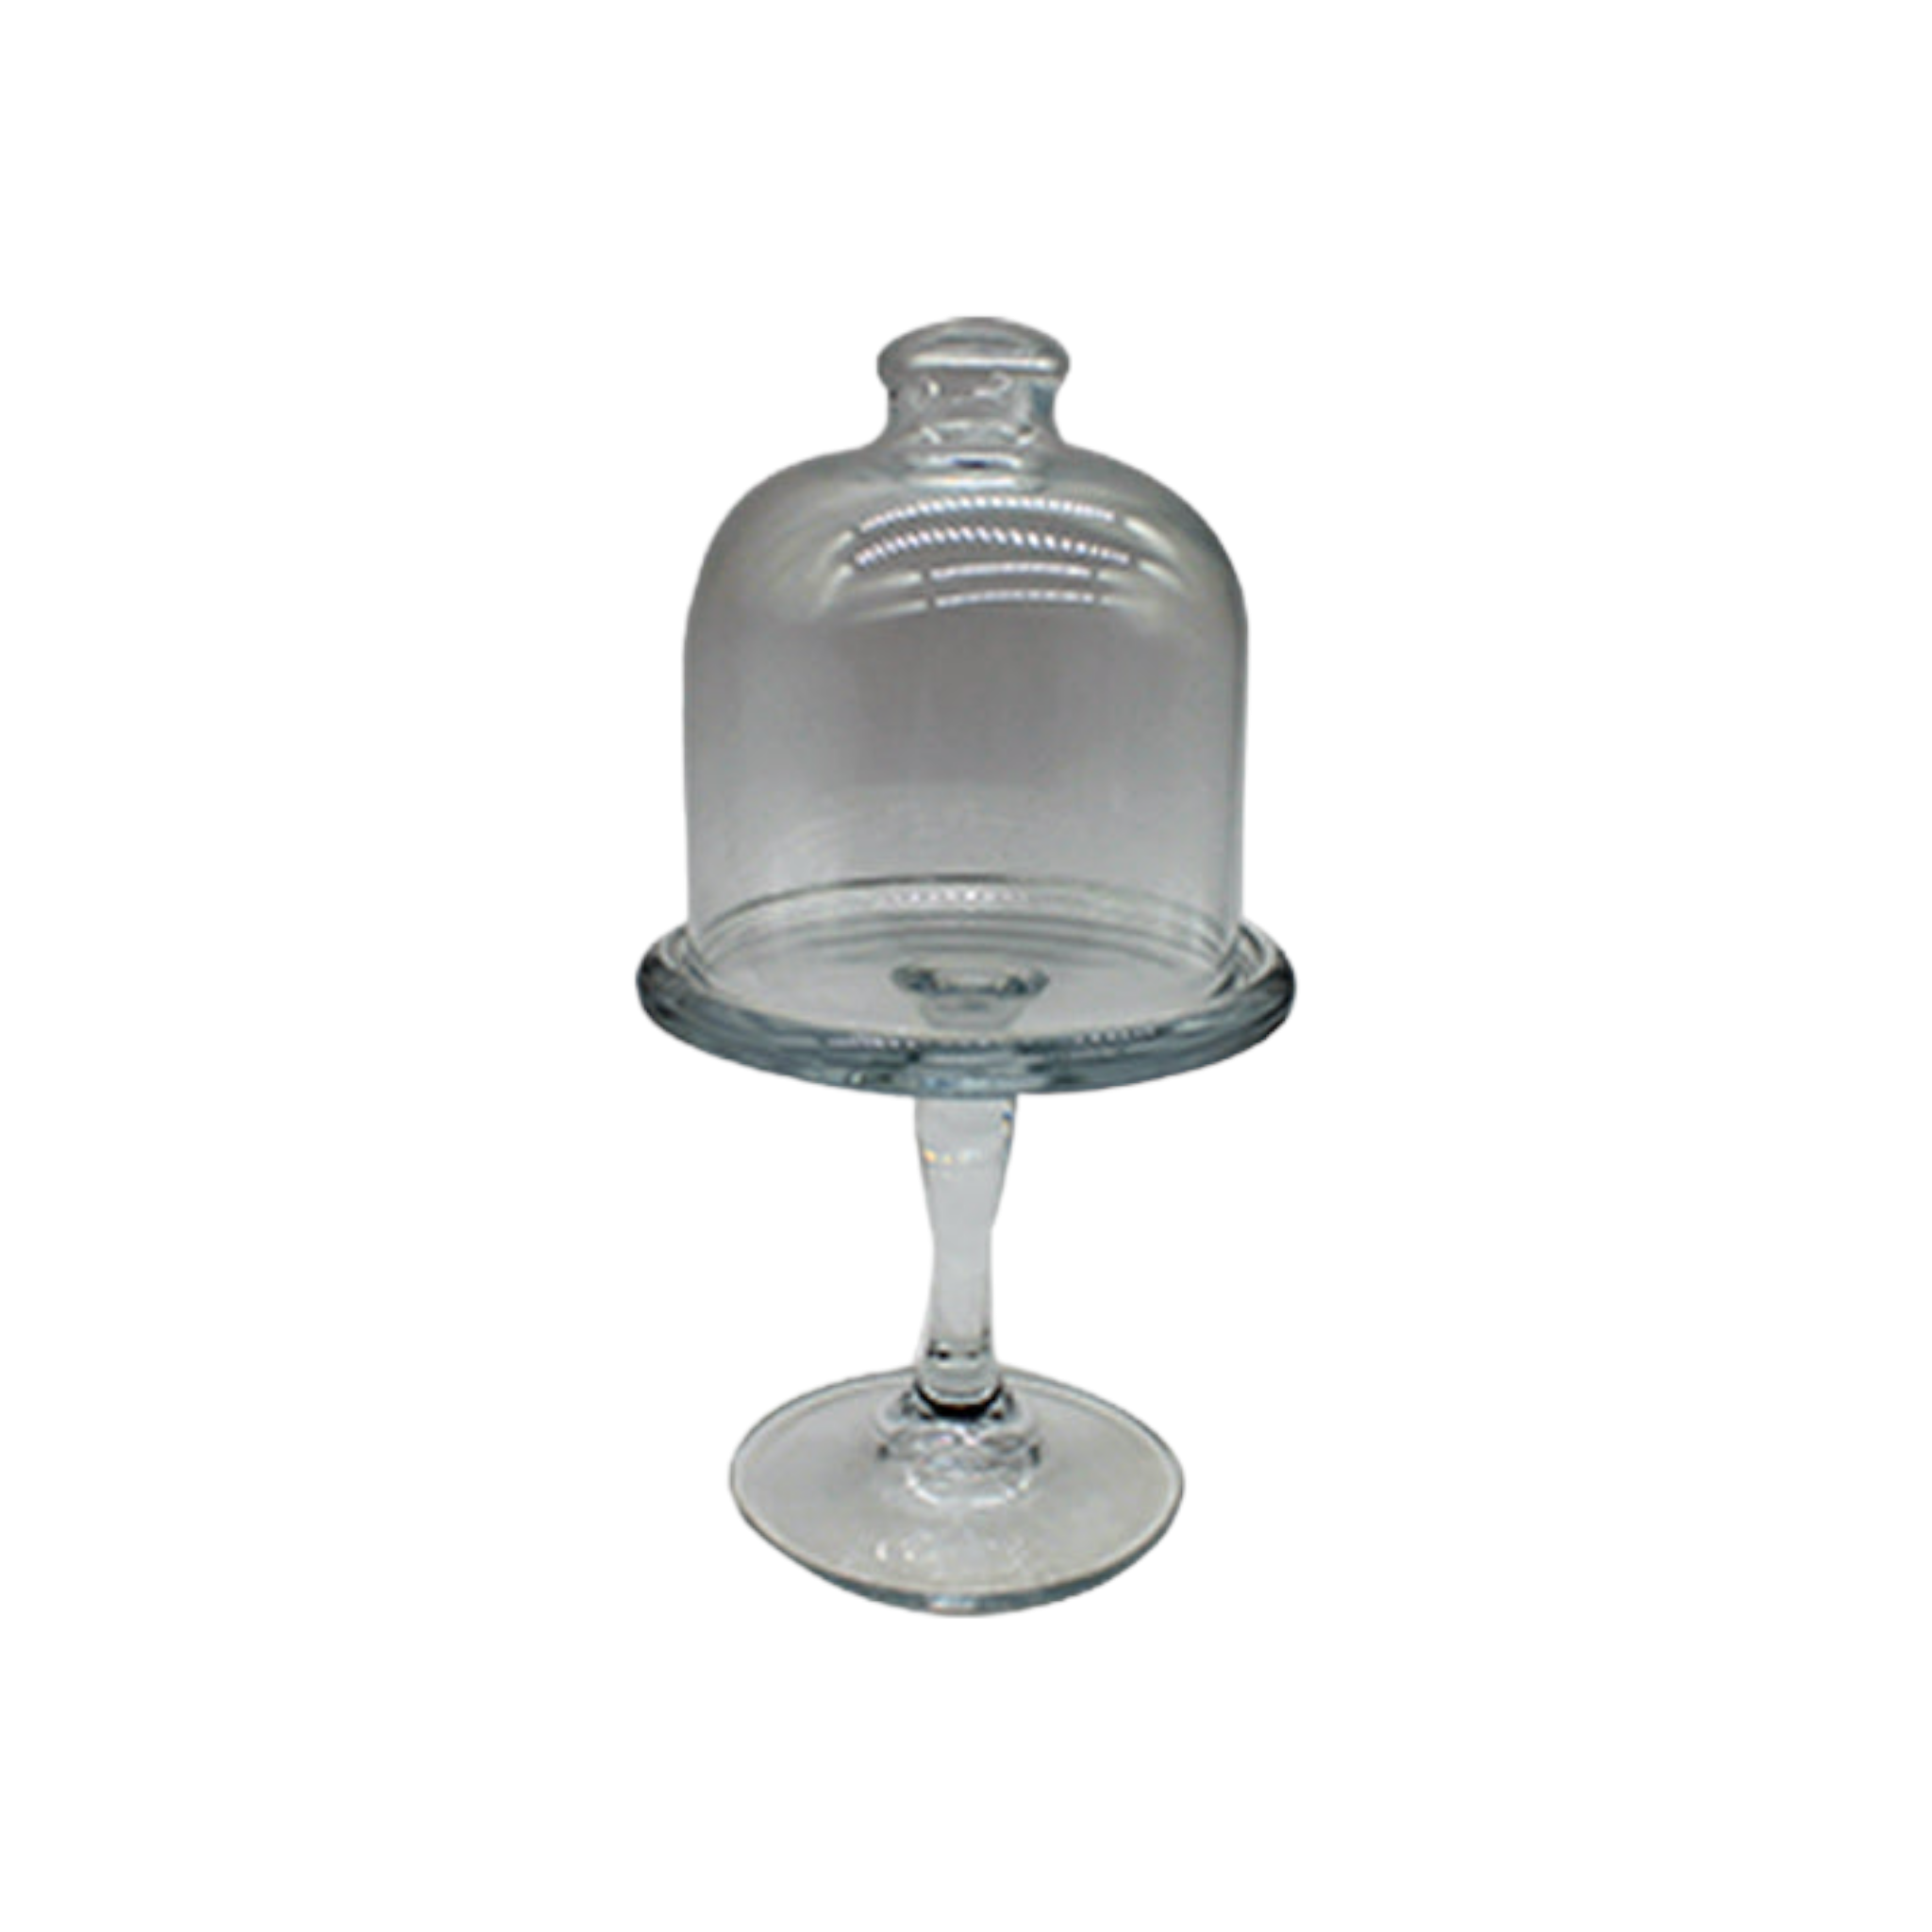 Pasabahce Mini Patisserie Cupcake Serving Stand with Glass Dome Lid 19.8x11cm